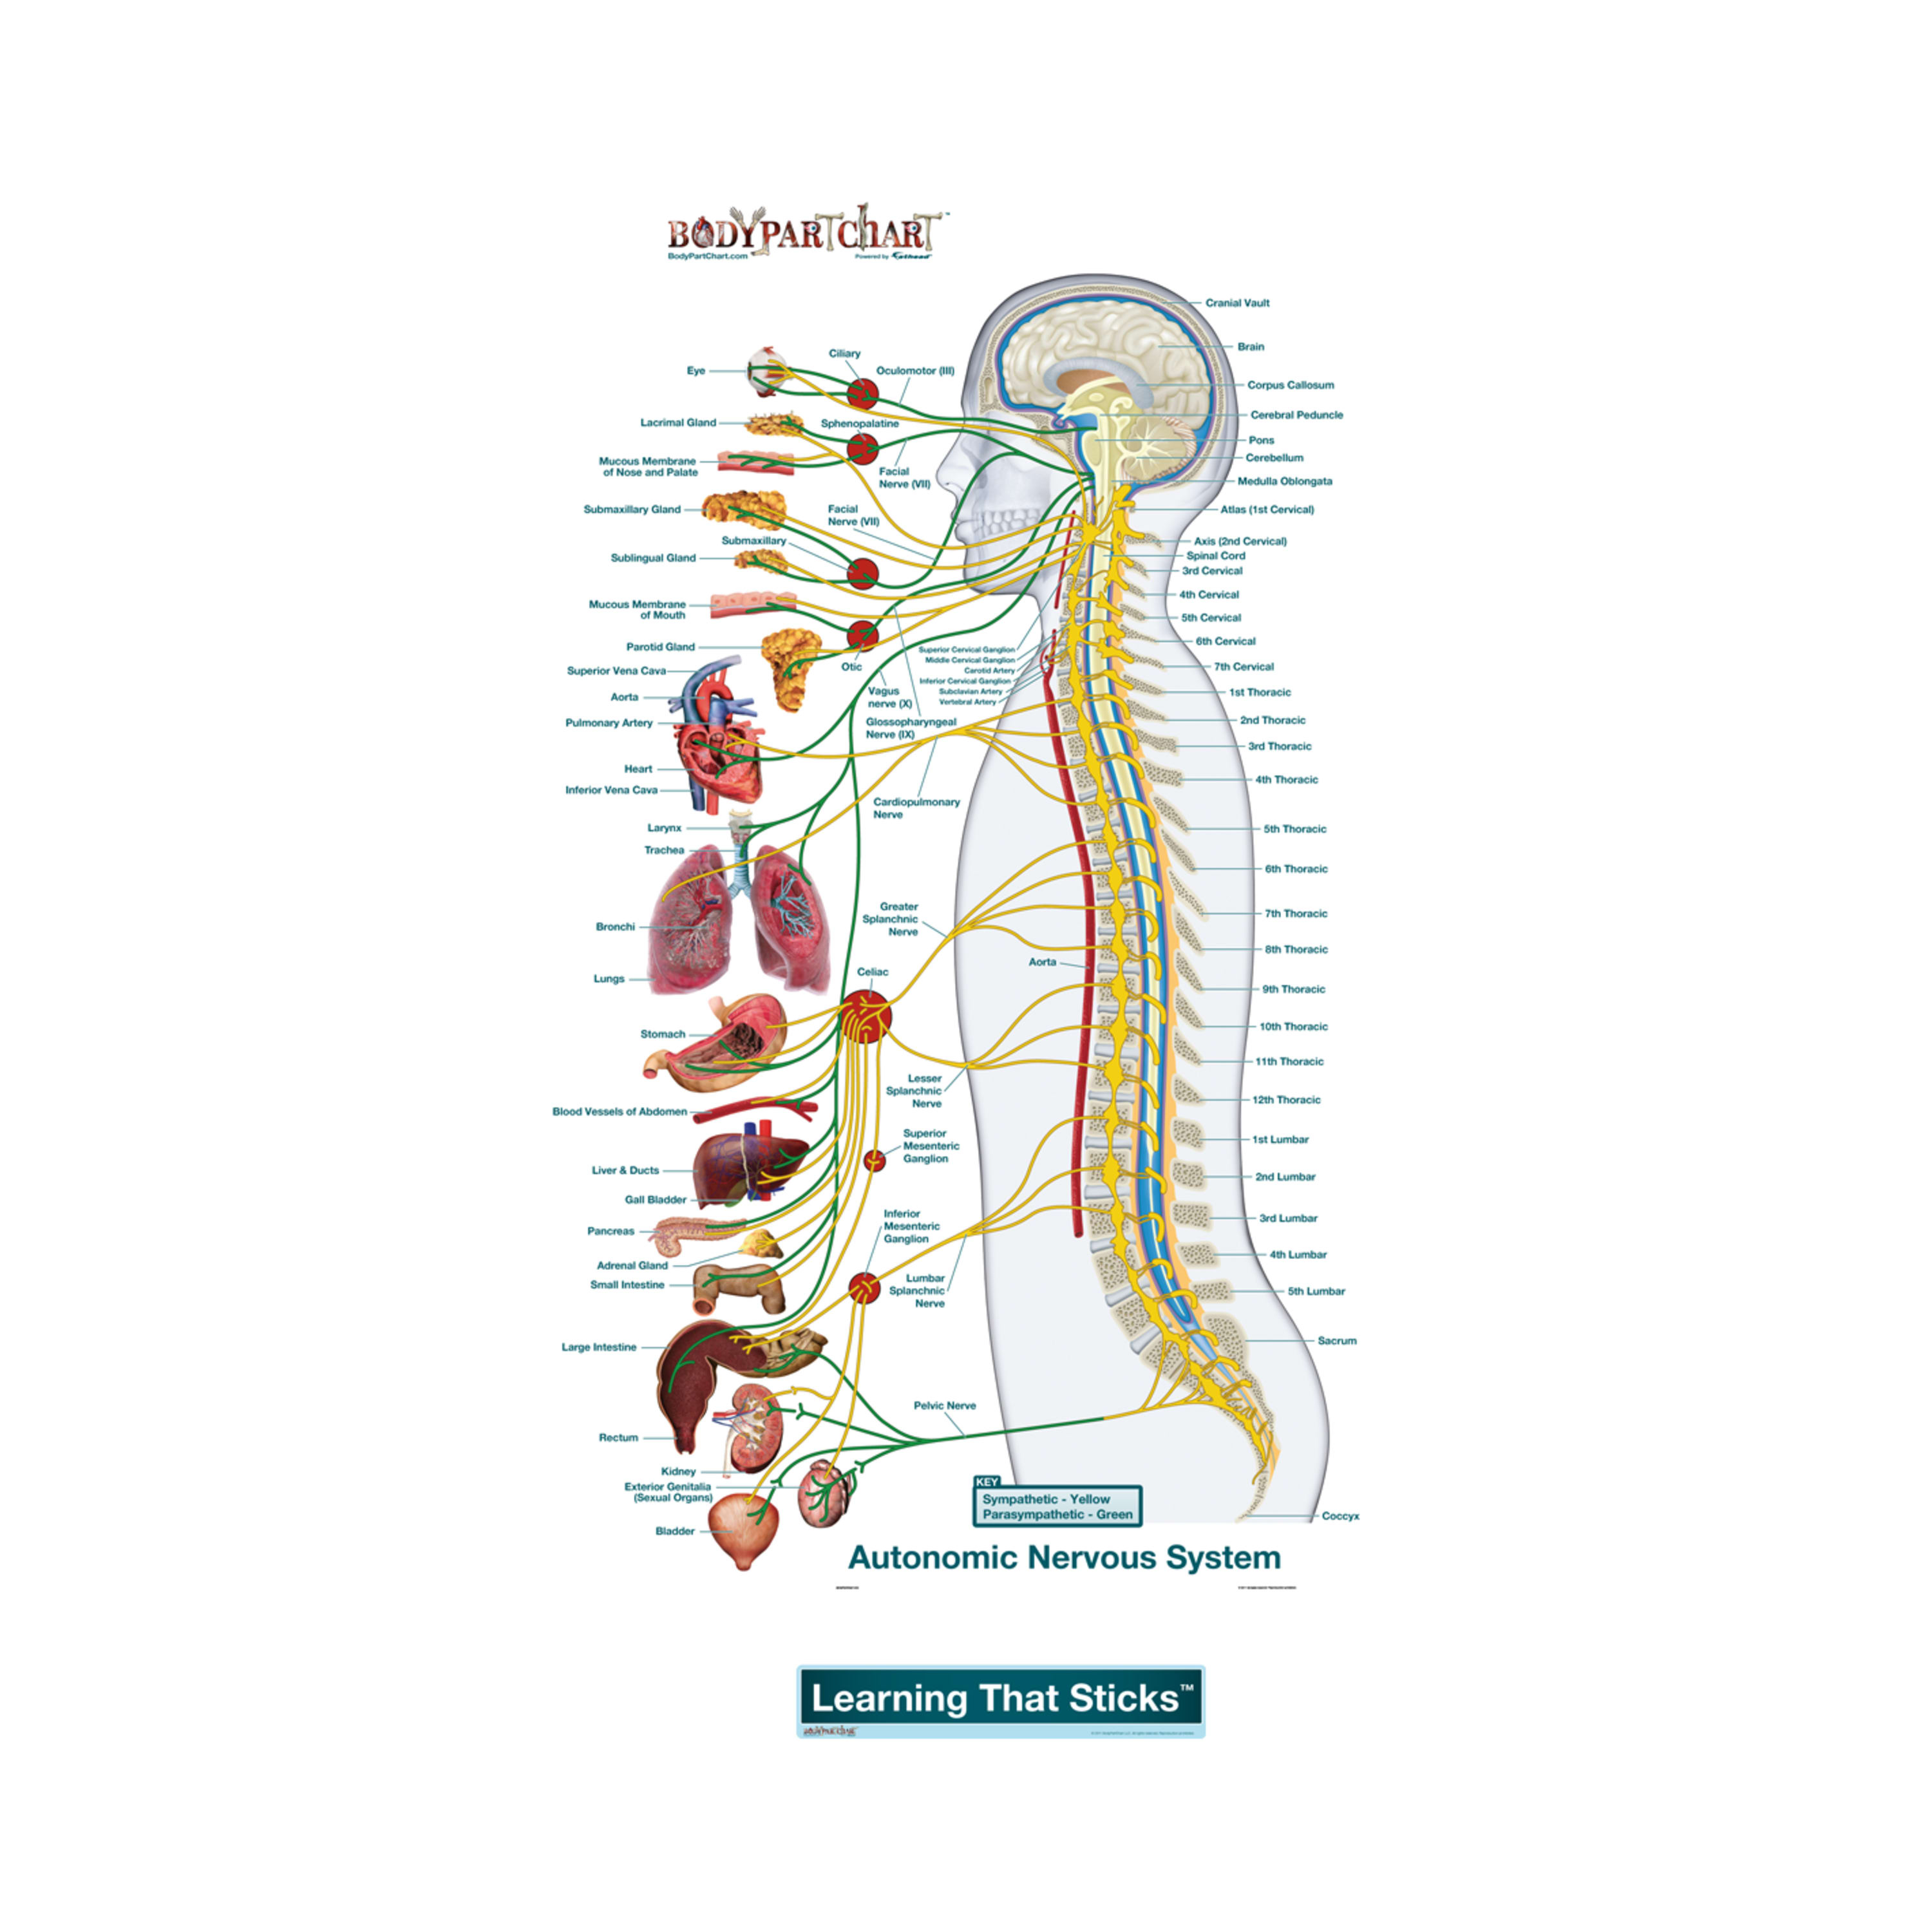 Nervous System Diagram Autonomic Nervous System Lateral Labeled Body Part Chart Removable Wall Graphic